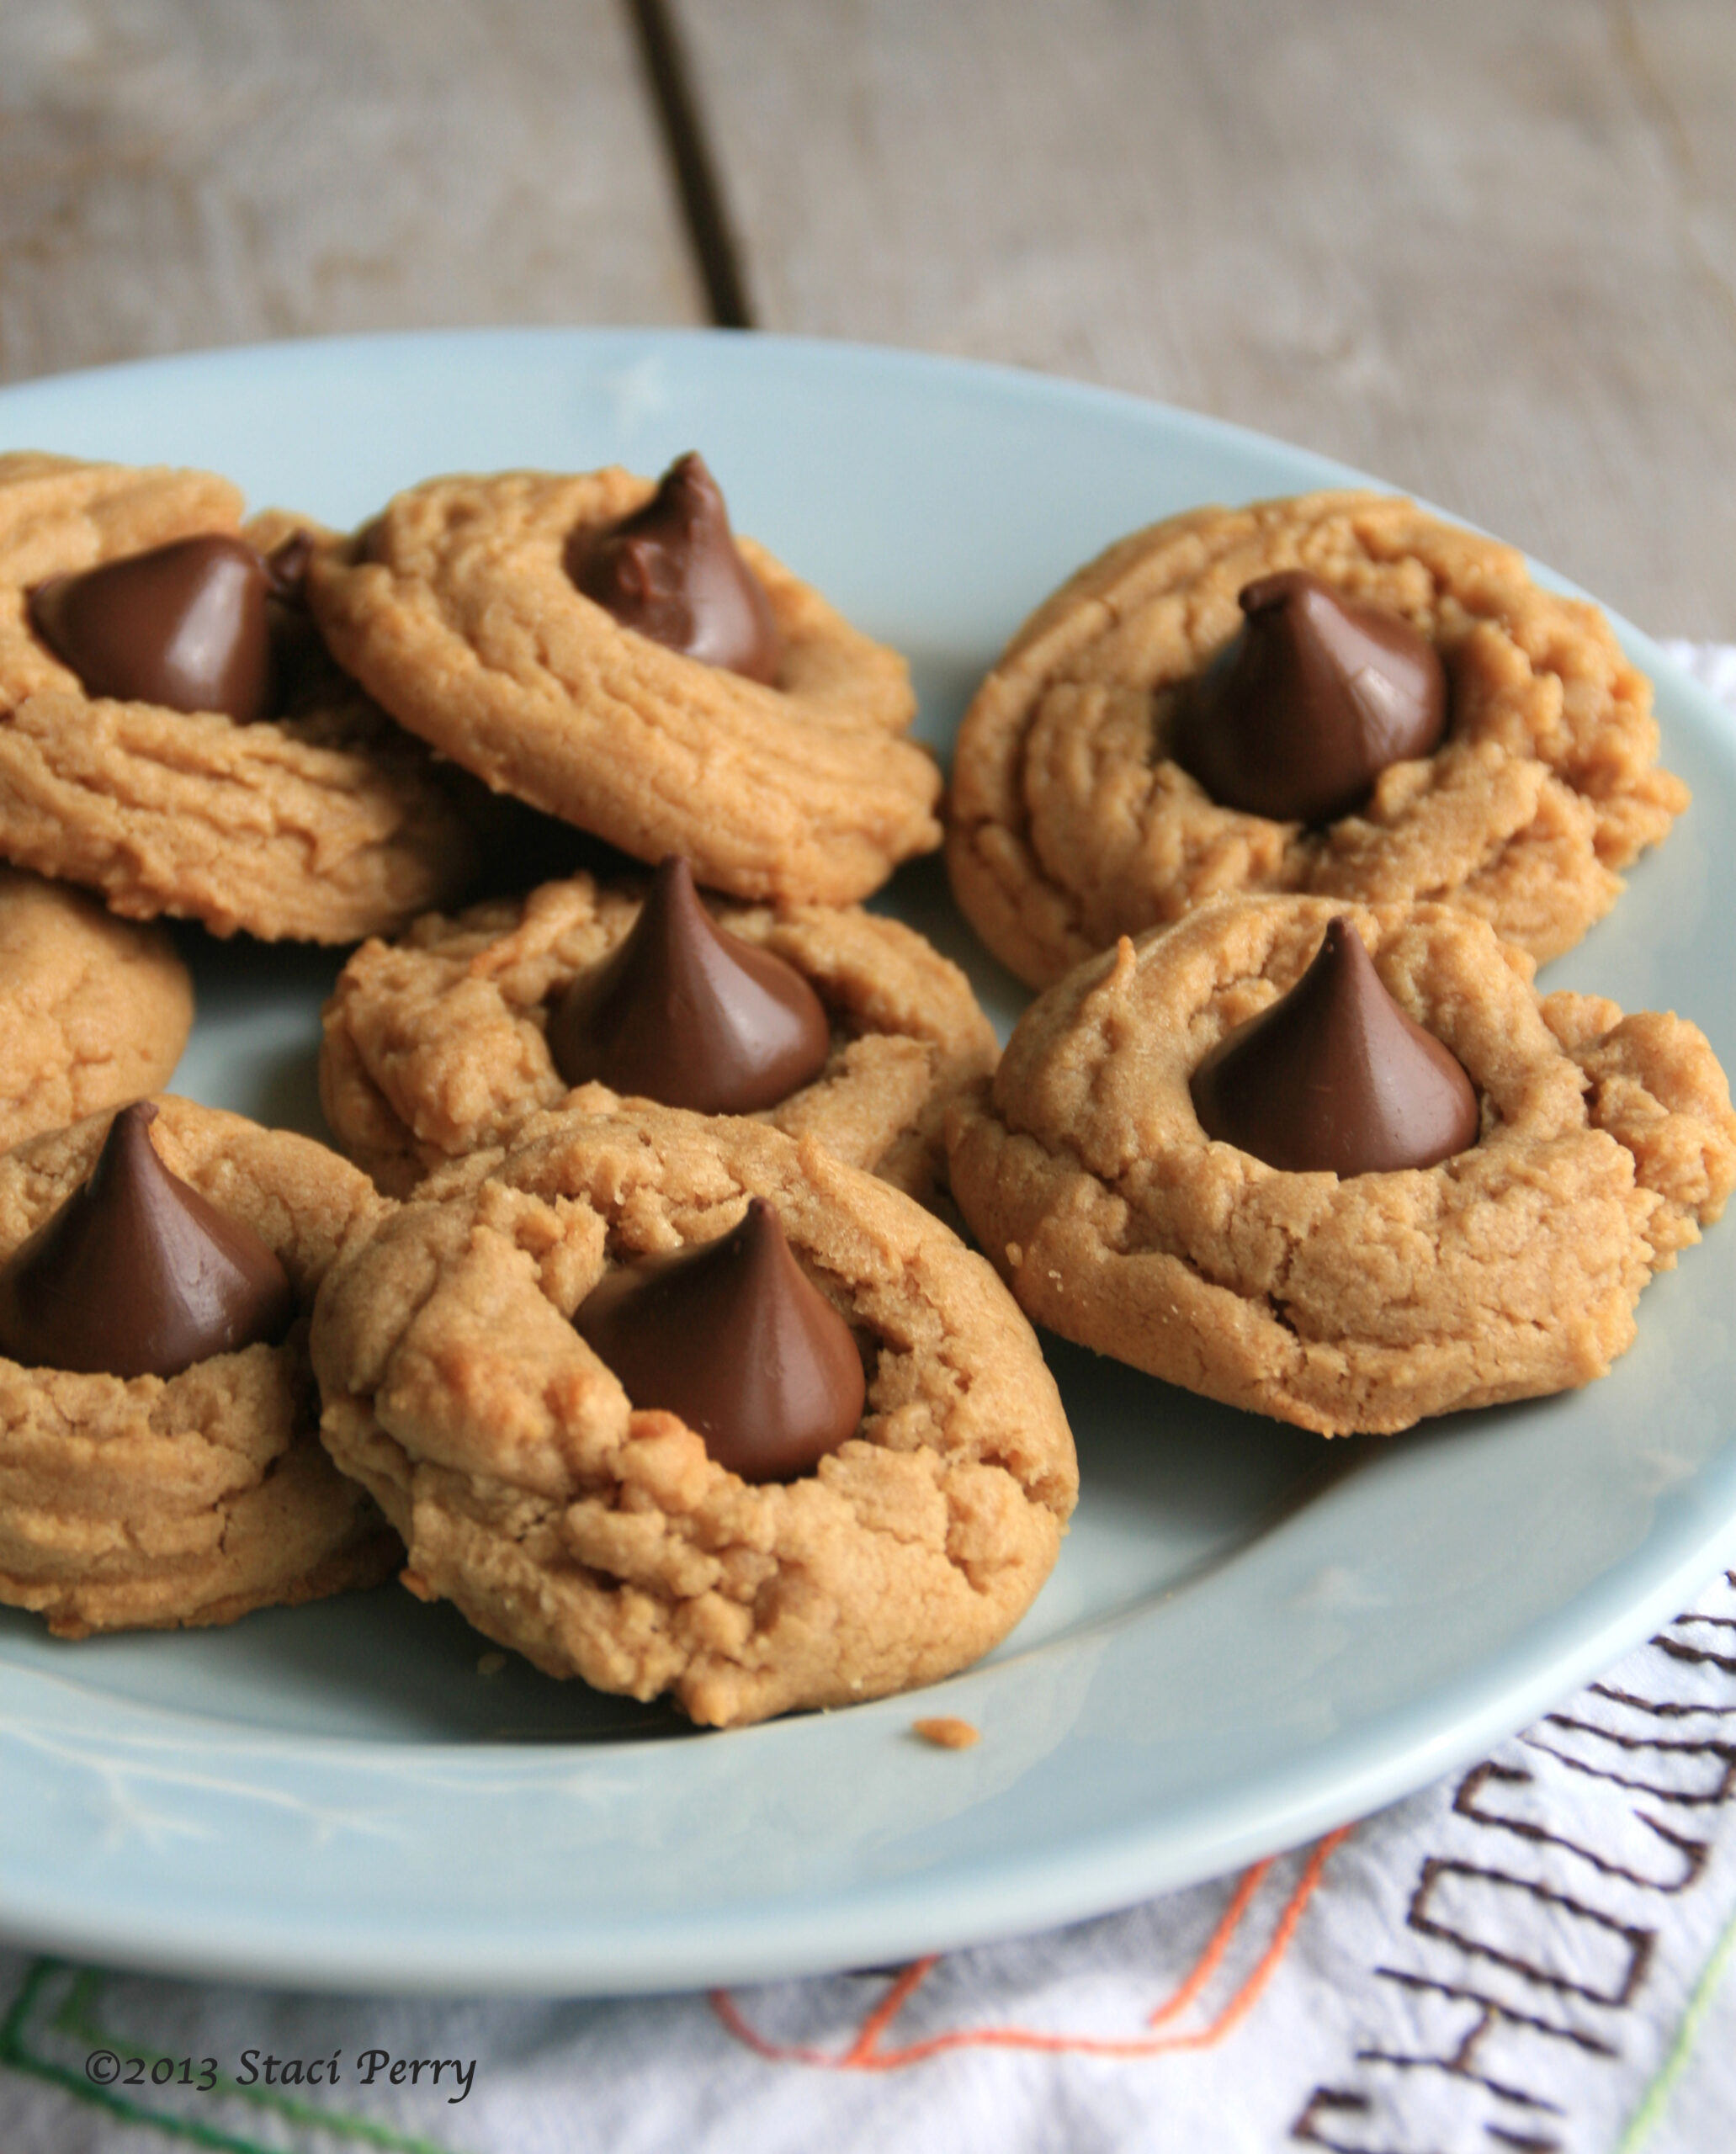 Hershey's Kisses peanut butter cookies or peanut butter blossoms